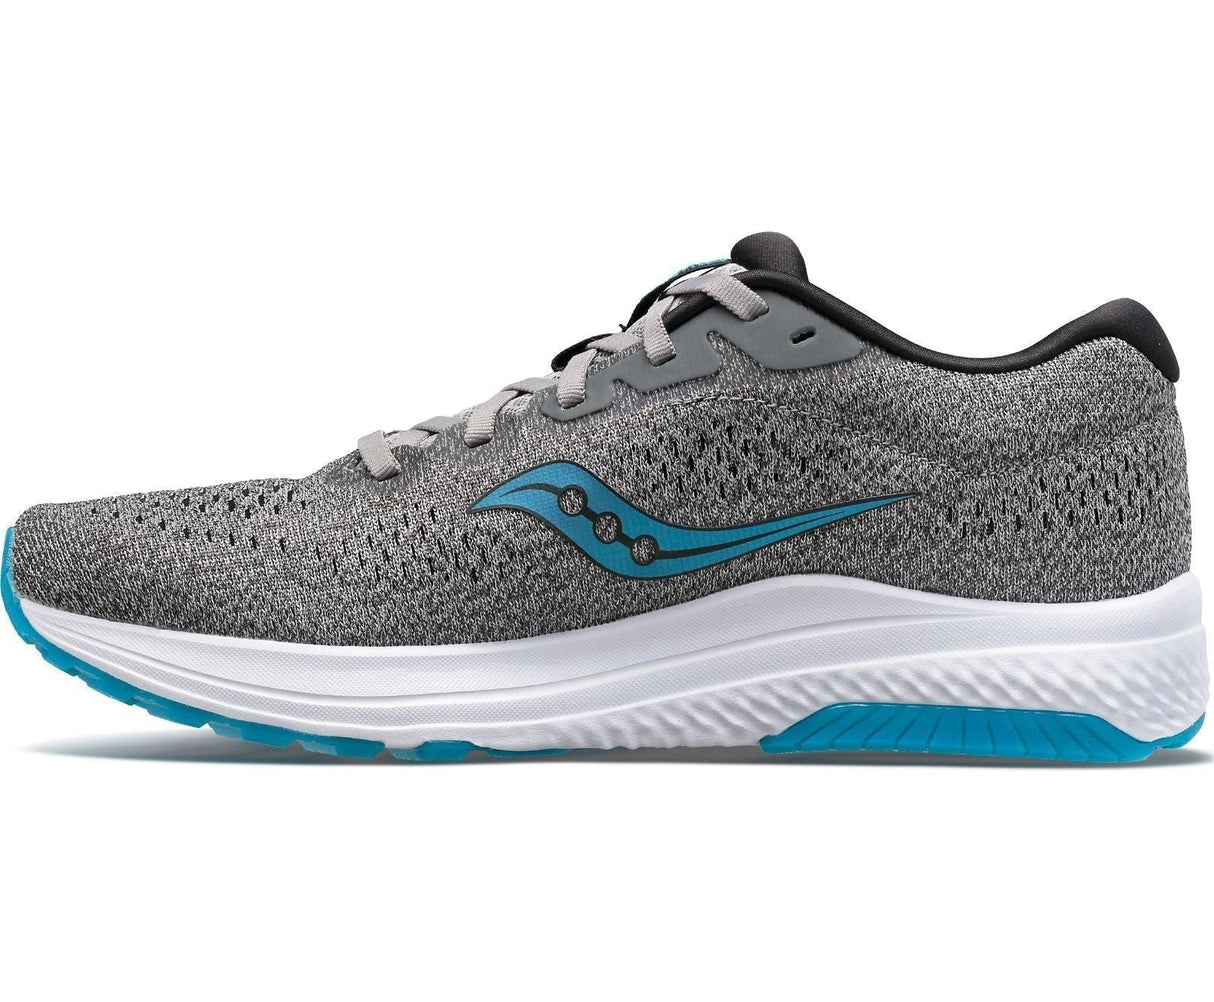 Saucony Men's Clarion 2 Runners - A&M Clothing & Shoes